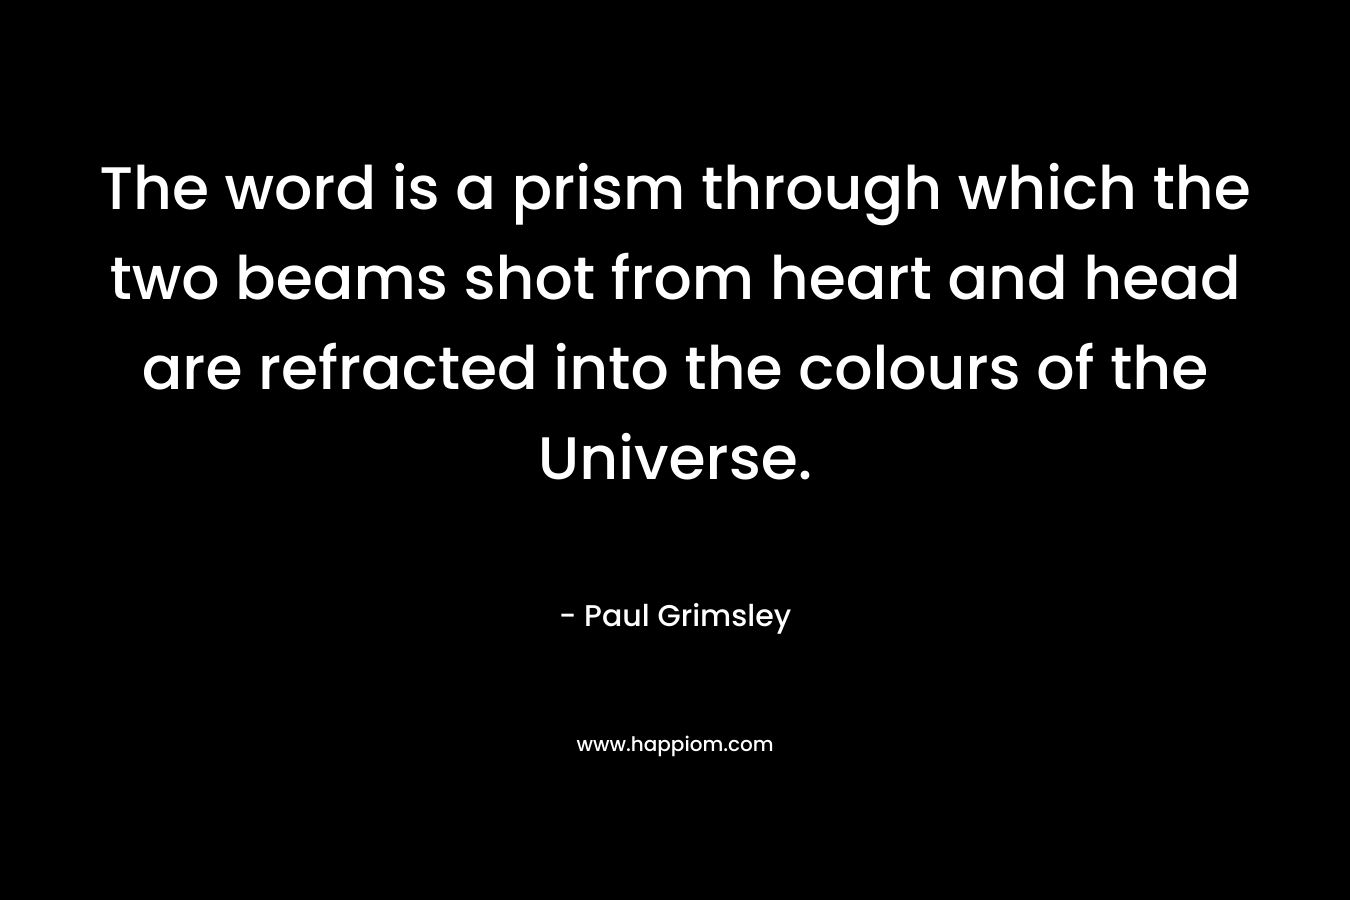 The word is a prism through which the two beams shot from heart and head are refracted into the colours of the Universe.